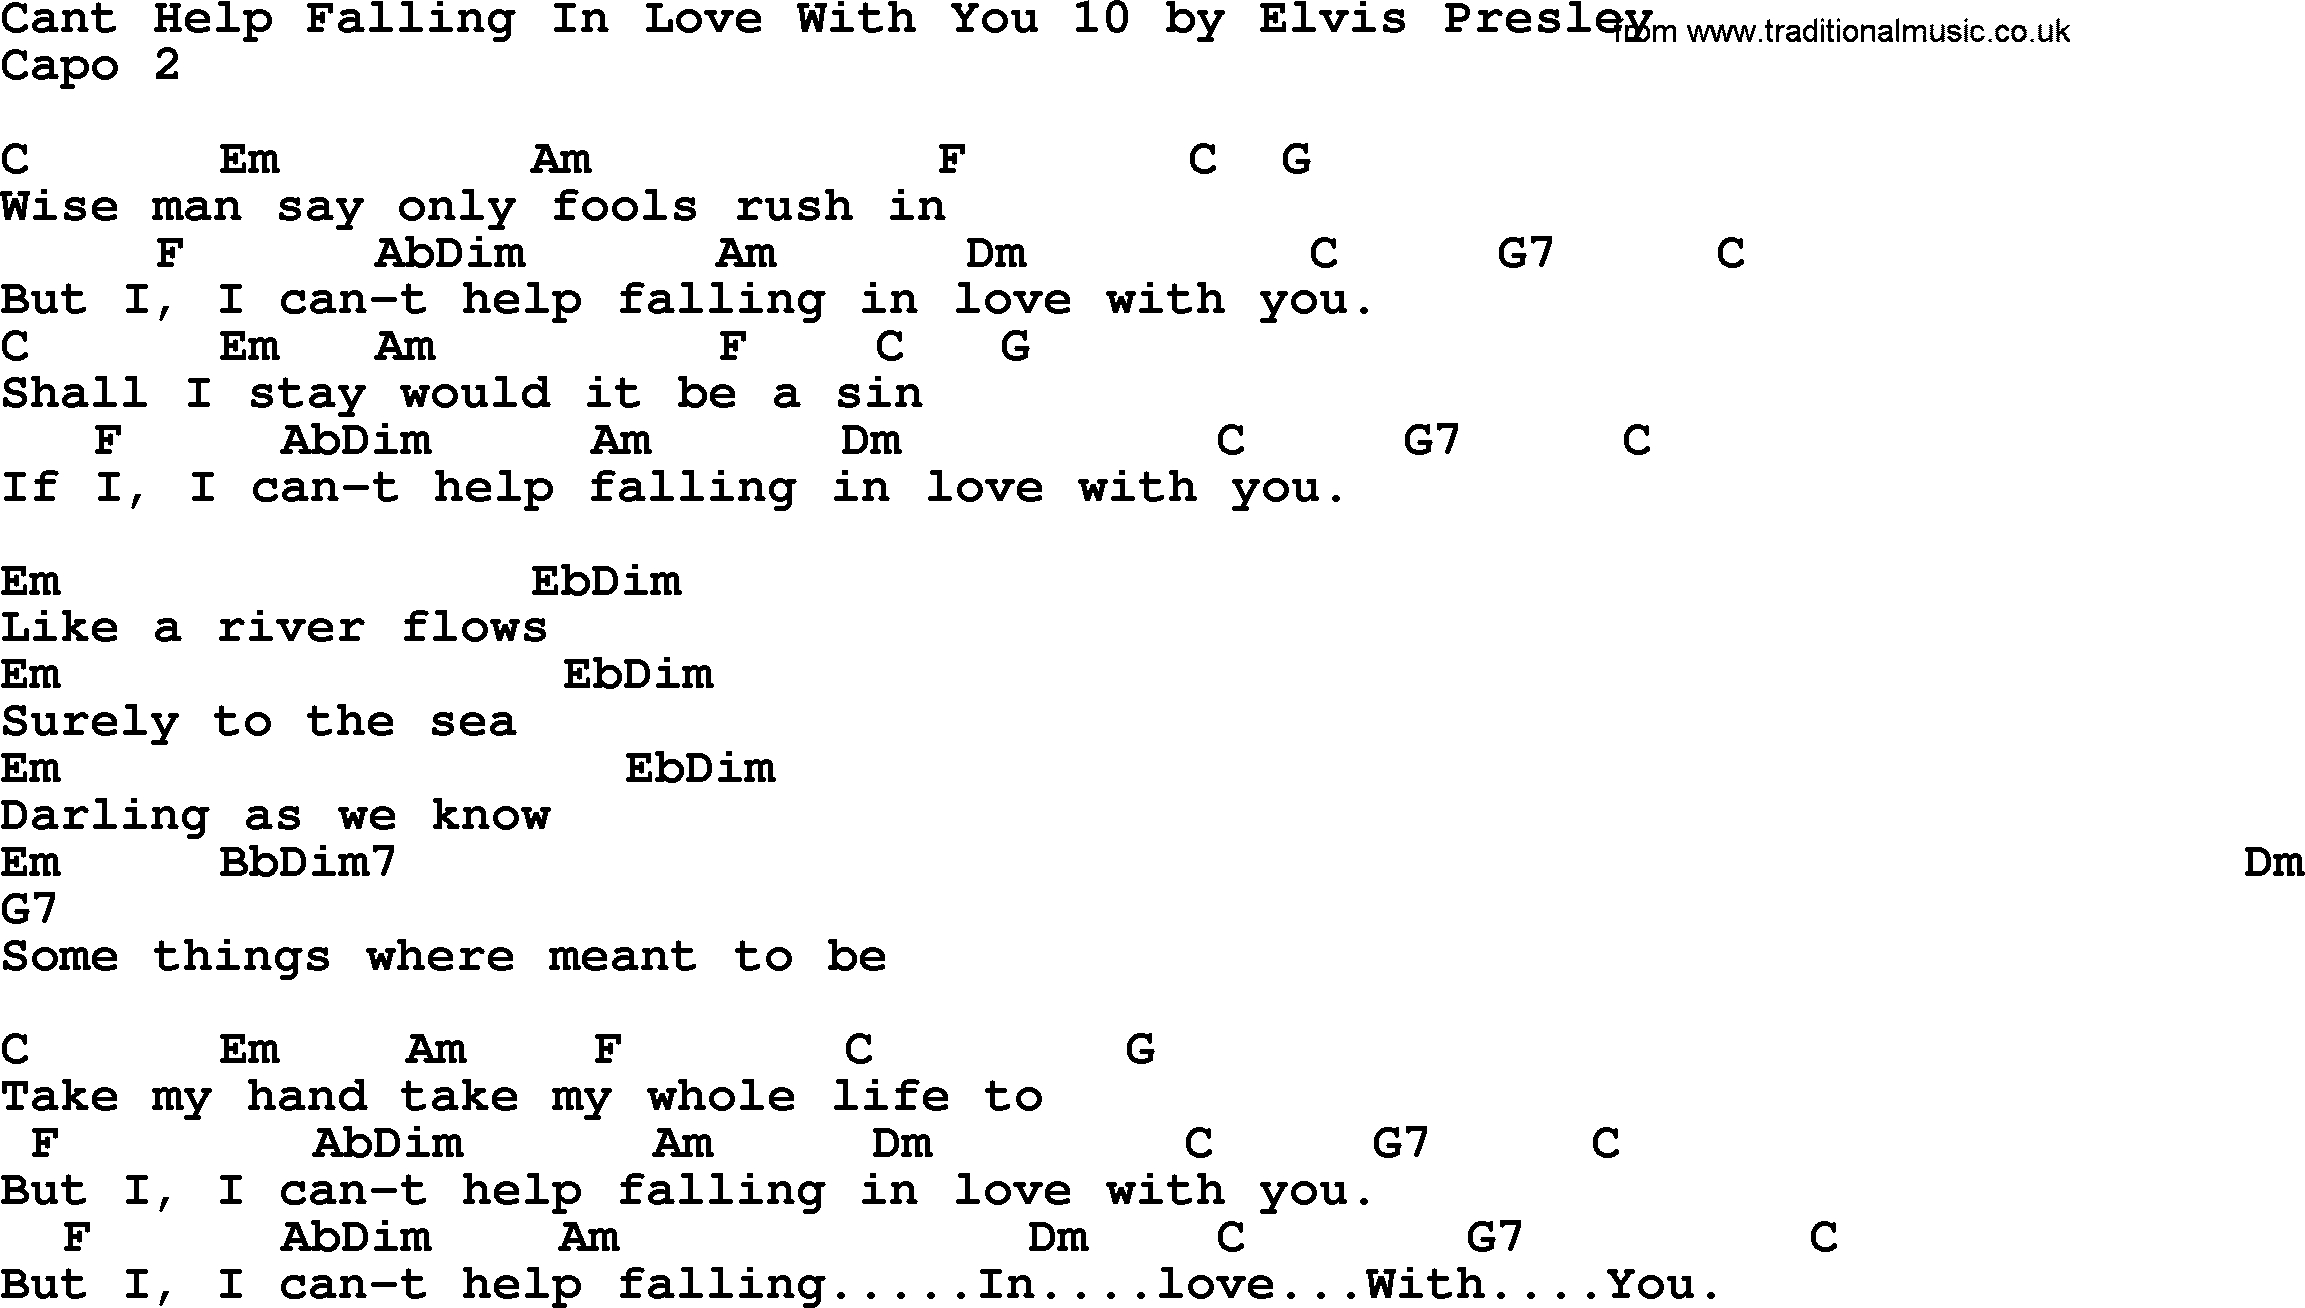 Can T Help Falling In Love Chords Cant Help Falling In Love With You 10 Elvis Presley Lyrics And